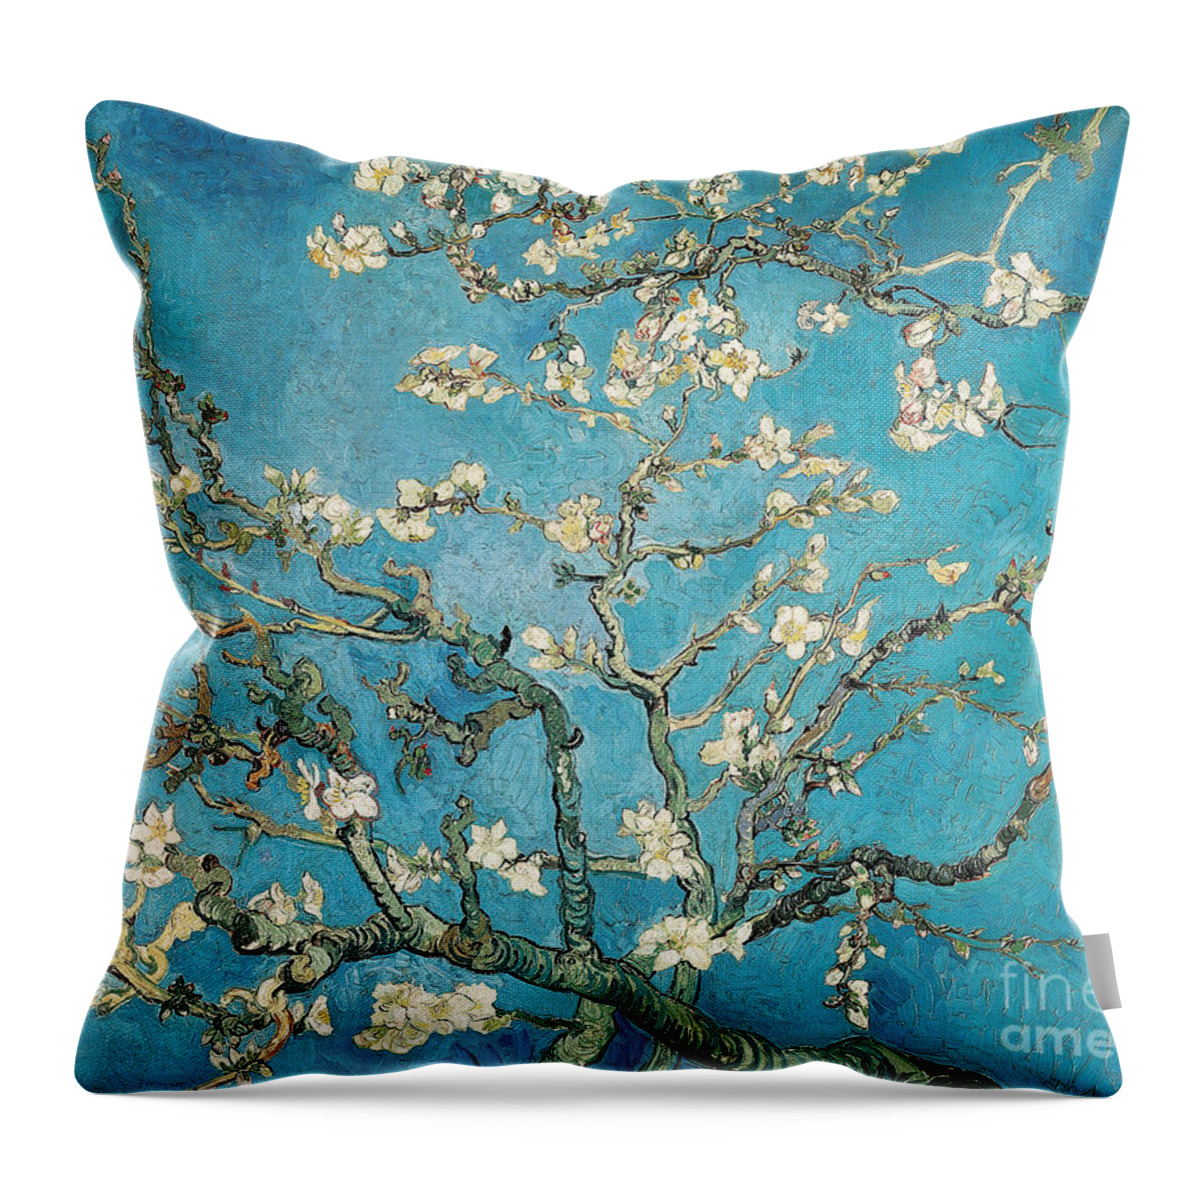 #faatoppicks Throw Pillow featuring the painting Almond branches in bloom by Vincent van Gogh